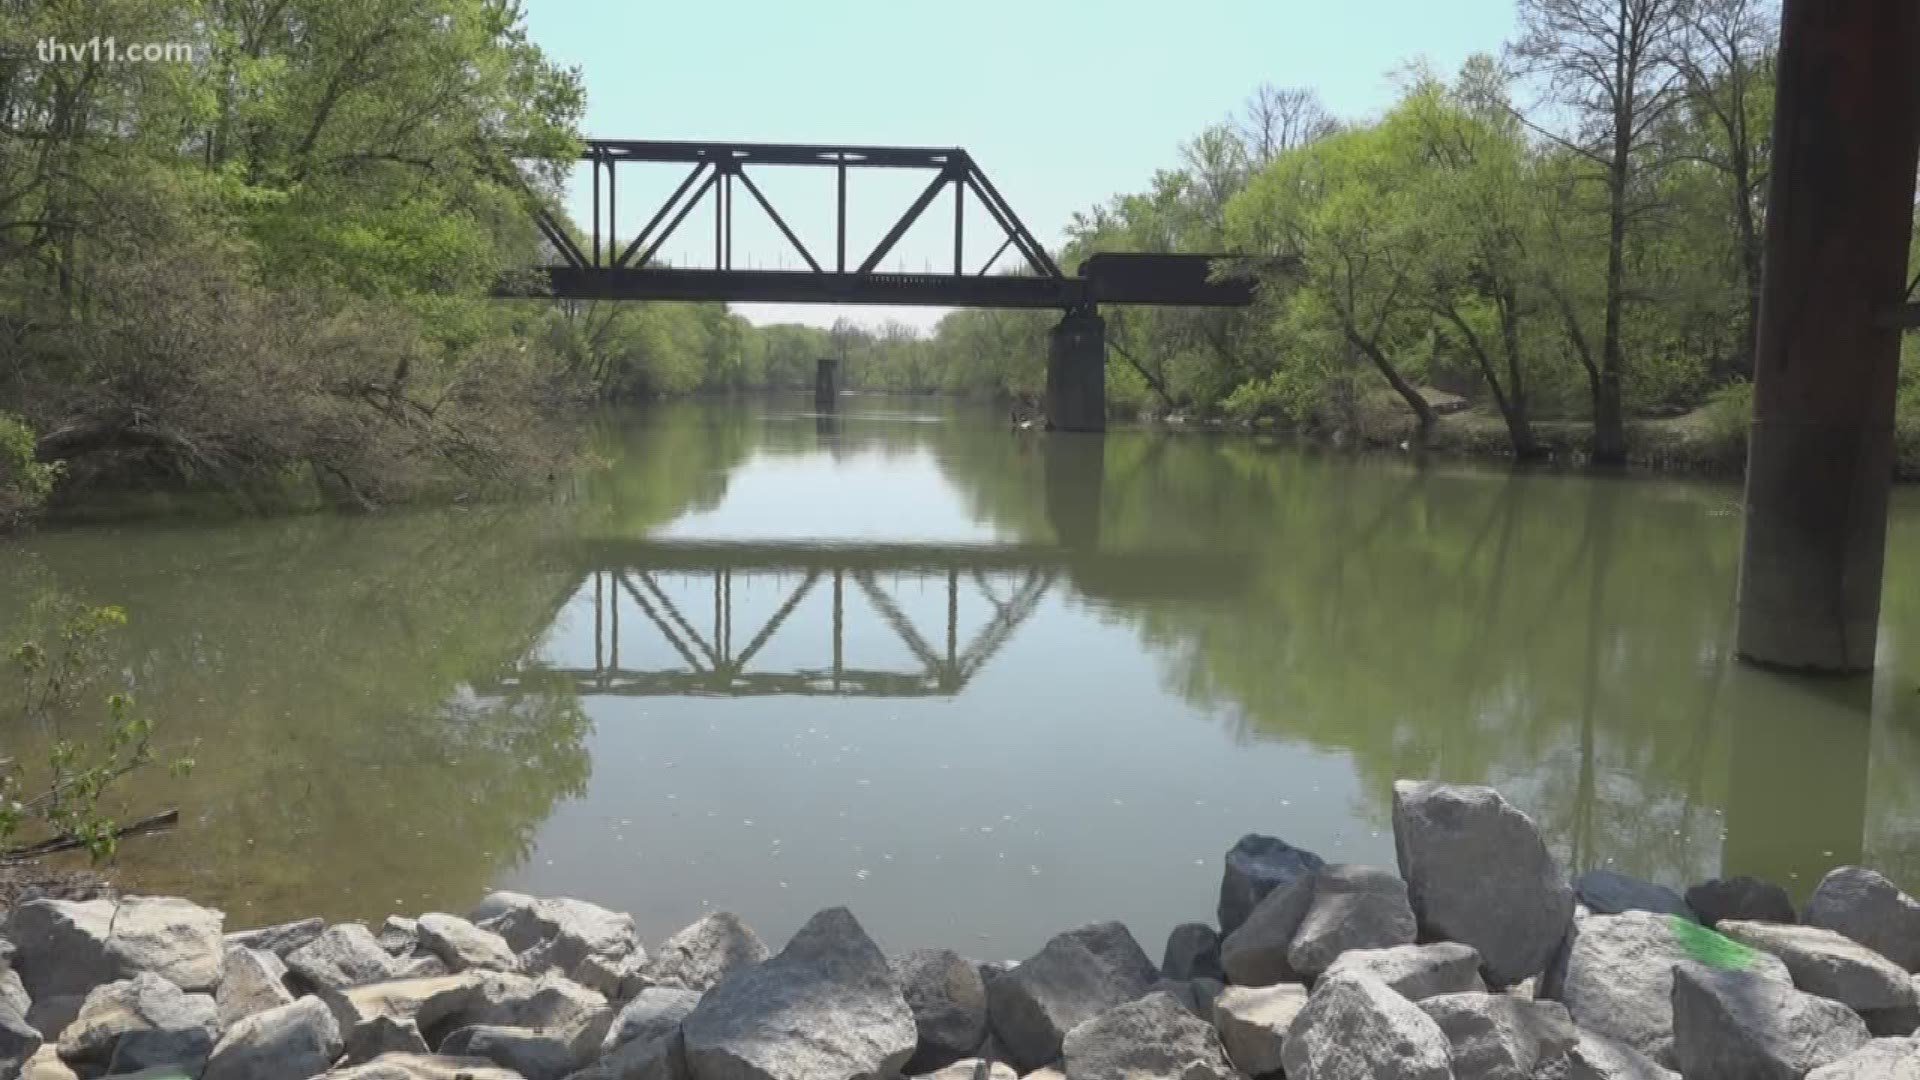 Decade-long effort to revive the old saline river bridge is finally happening.